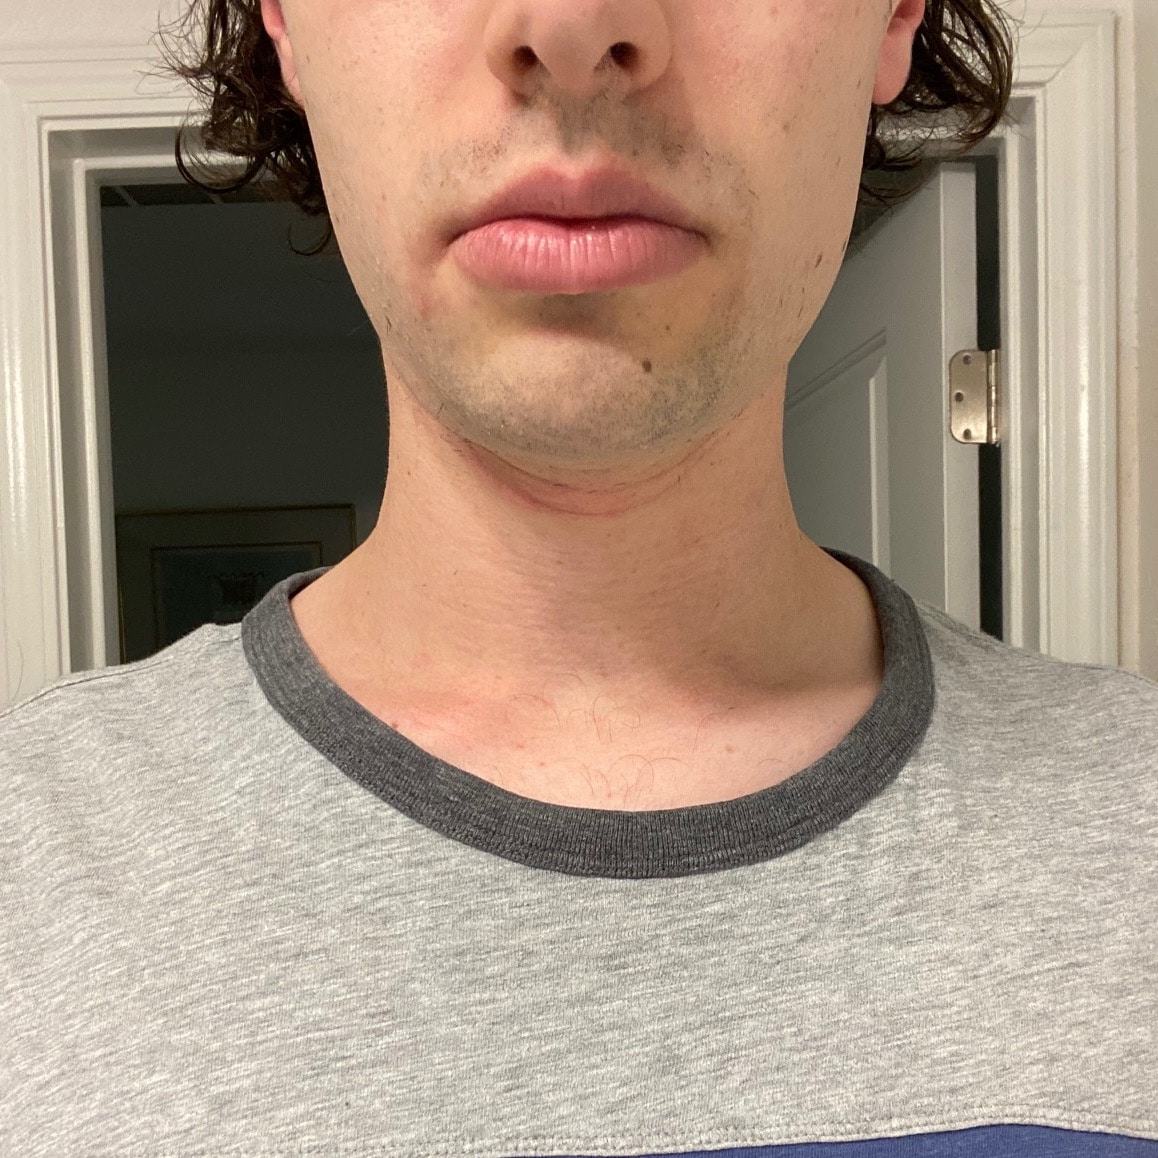 Face after shaving